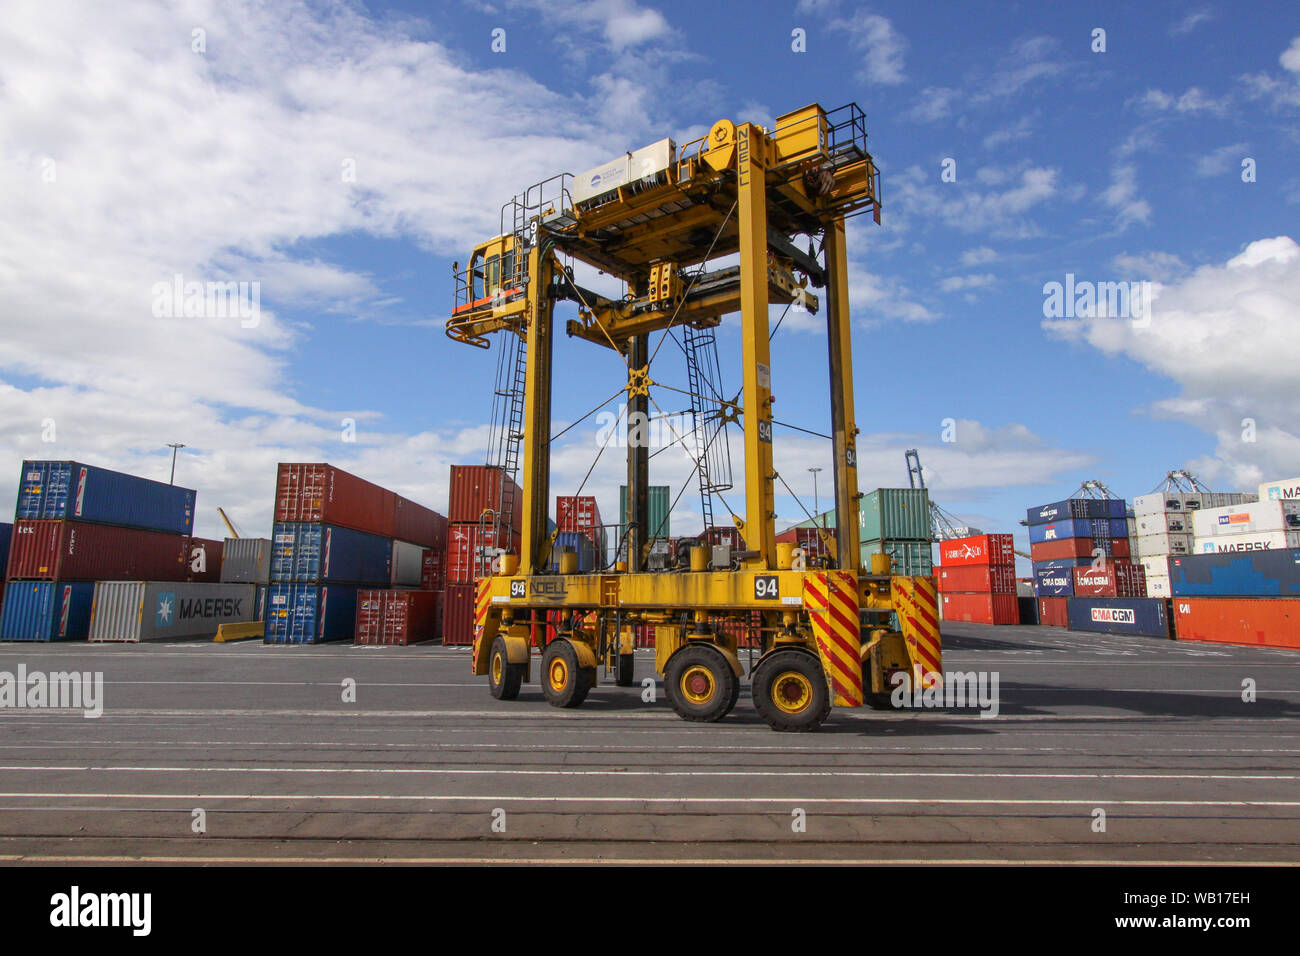 Van Carrier High Resolution Stock Photography and Images - Alamy